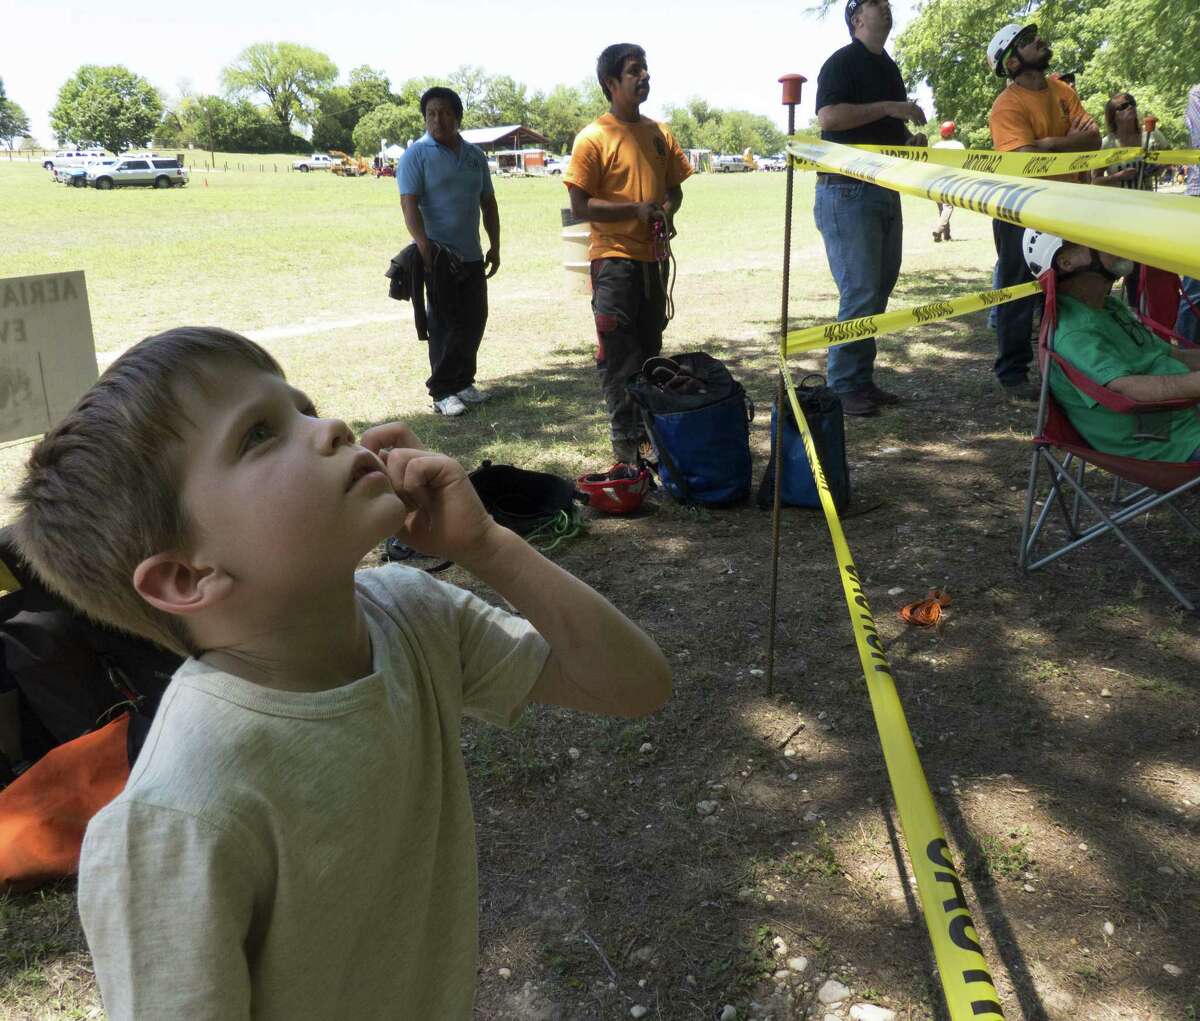 Topher Nelson, 6, watches as climbers compete in the Texas Tree Climbing Championship in New Braunfels. Events include the throw line, foot lock, aerial rescue and work climb.